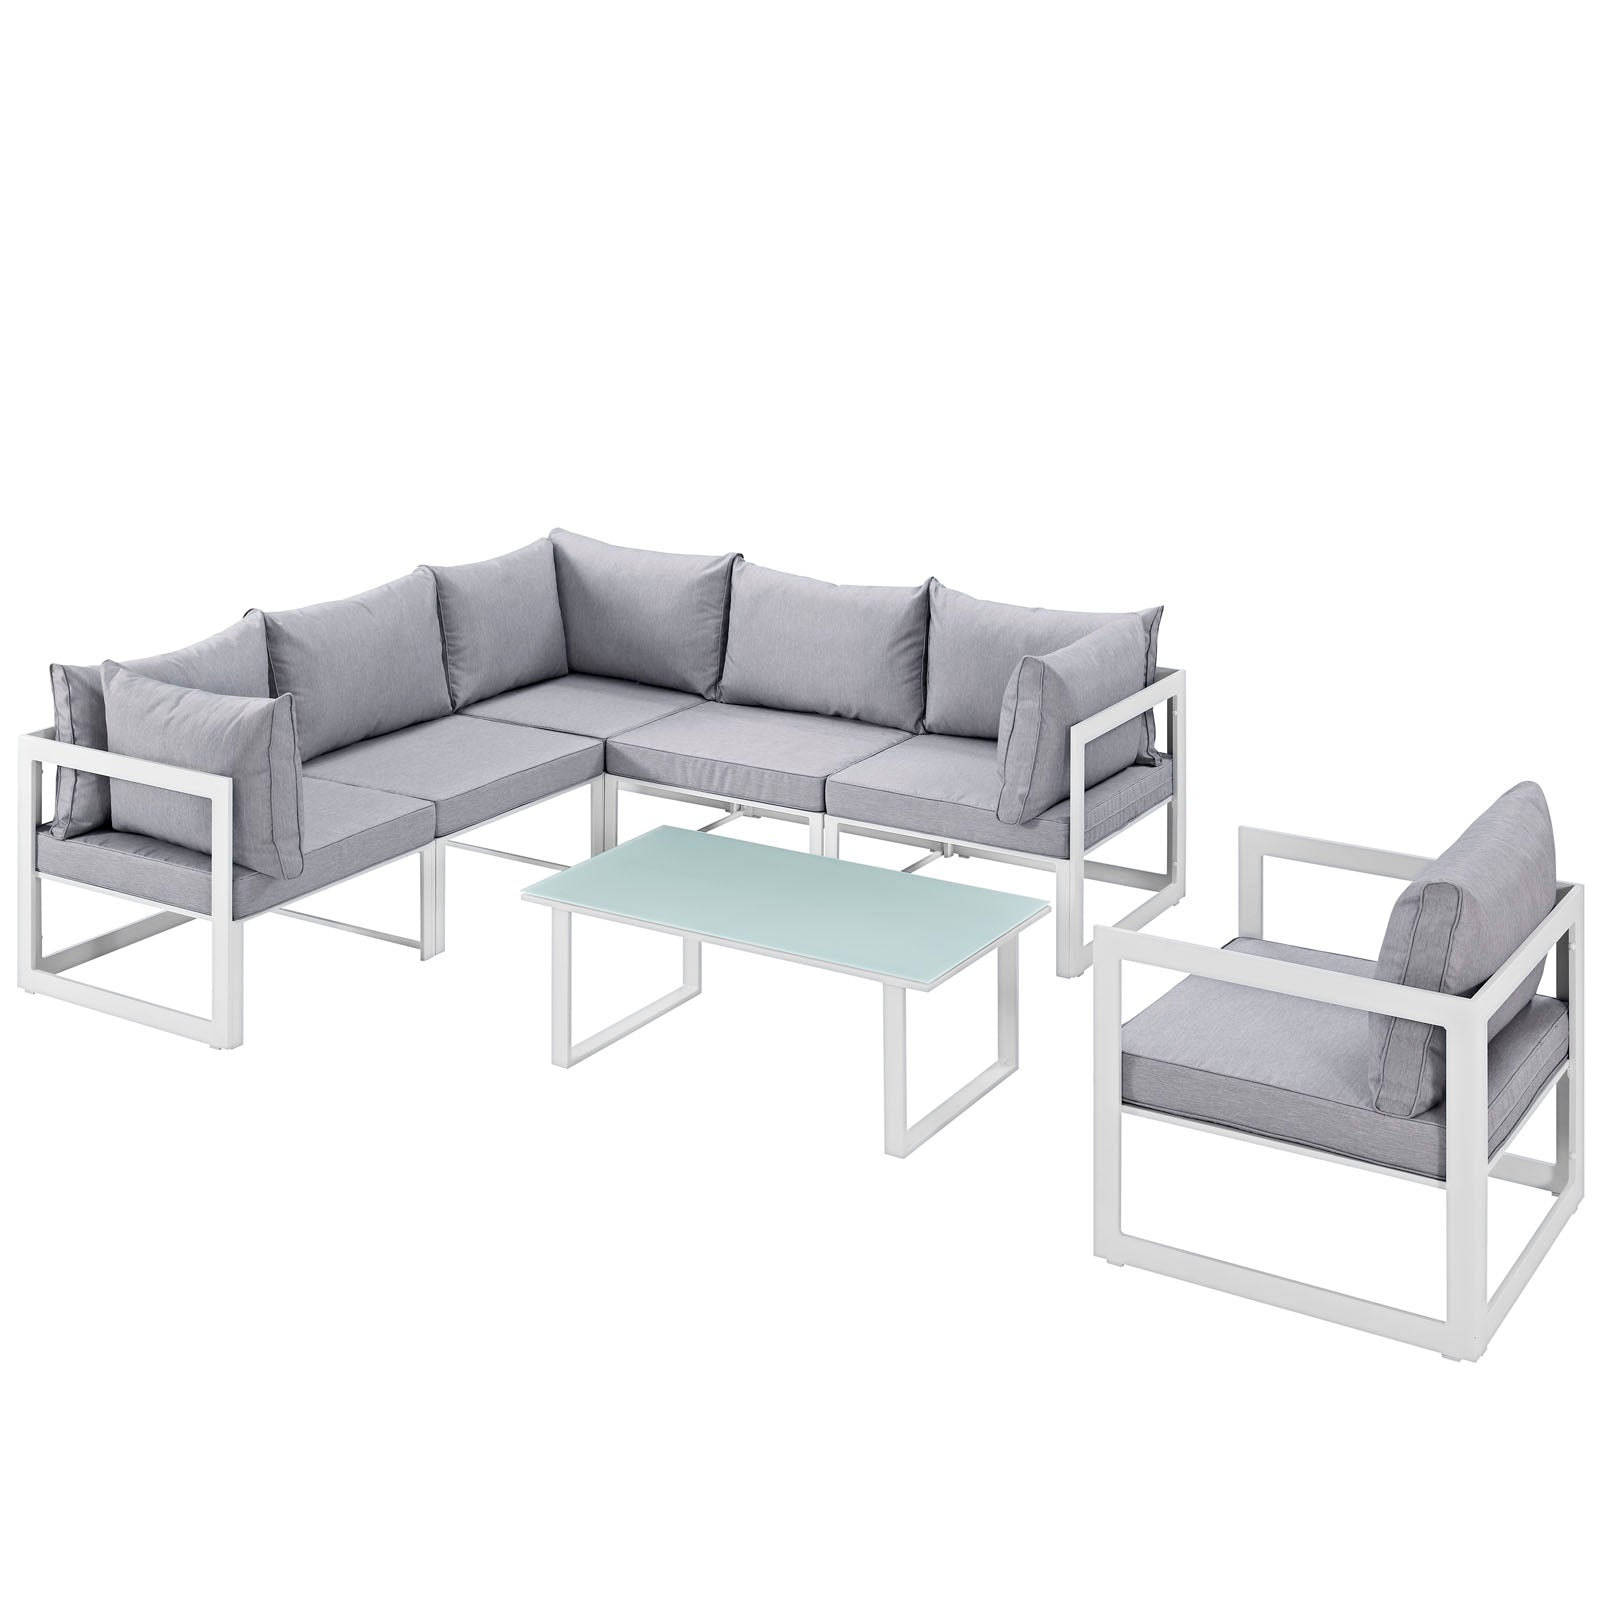 Modway Outdoor Conversation Sets - Fortuna 7 Piece Outdoor 150"W Patio Sectional Sofa Set White Gray